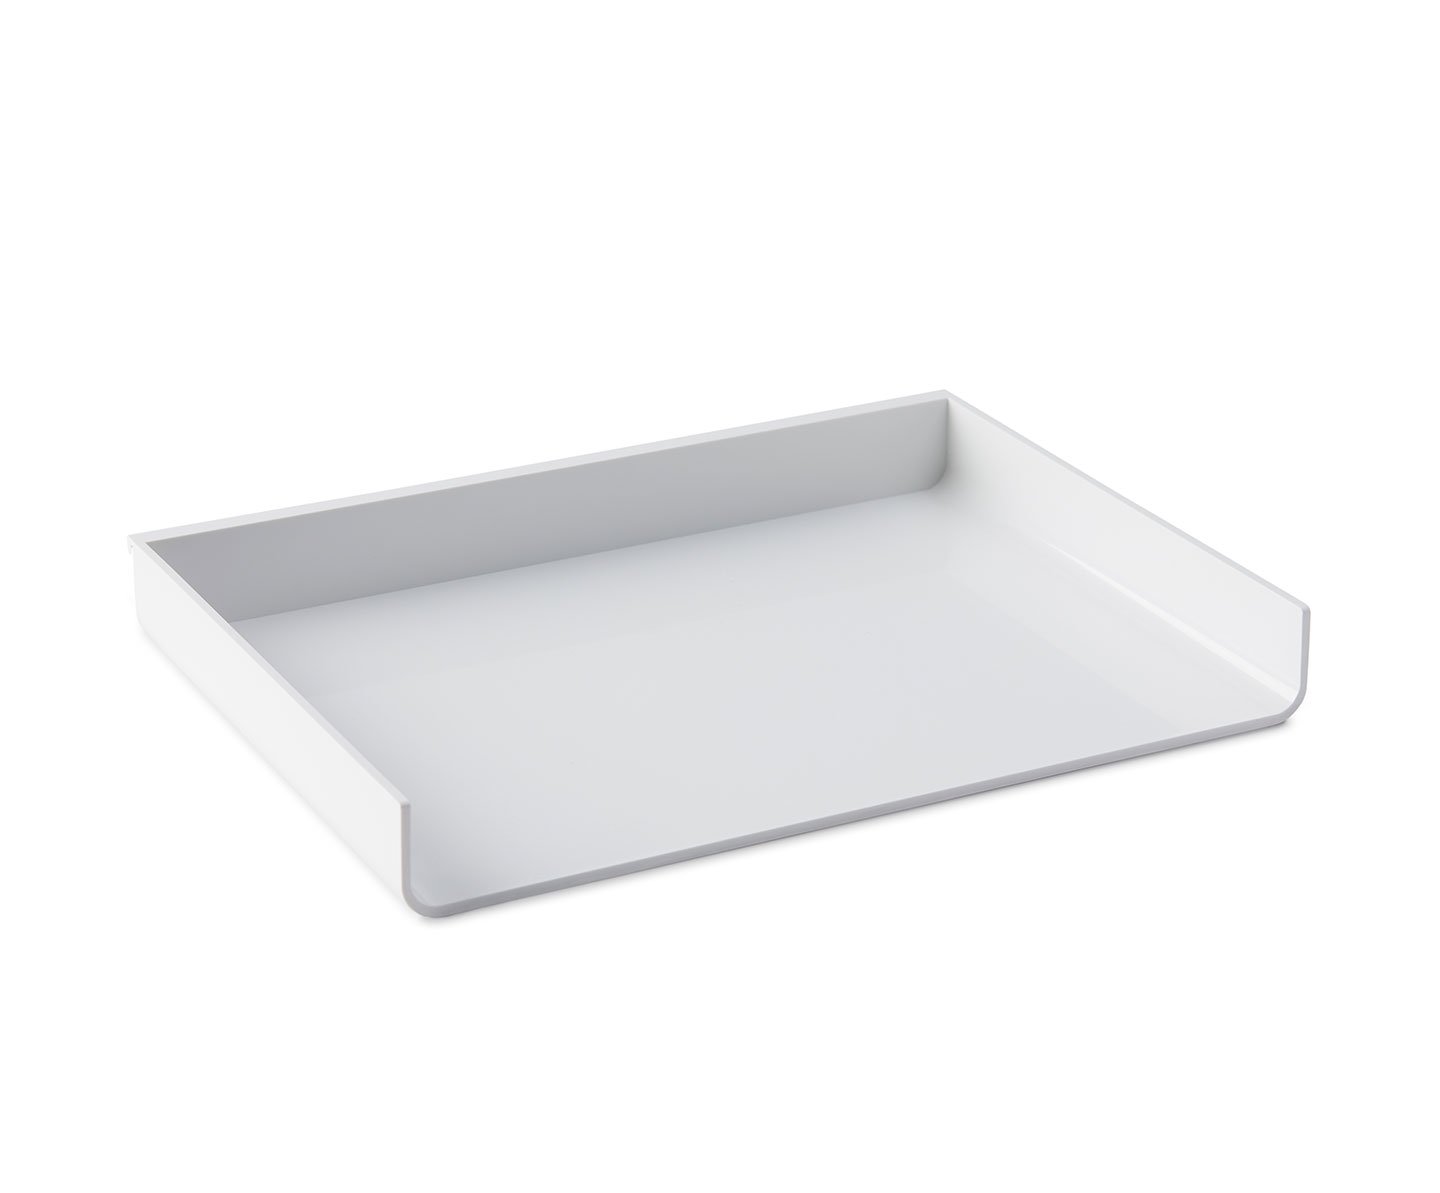 Haworth Belong Work Tools Accessories paper tray in white